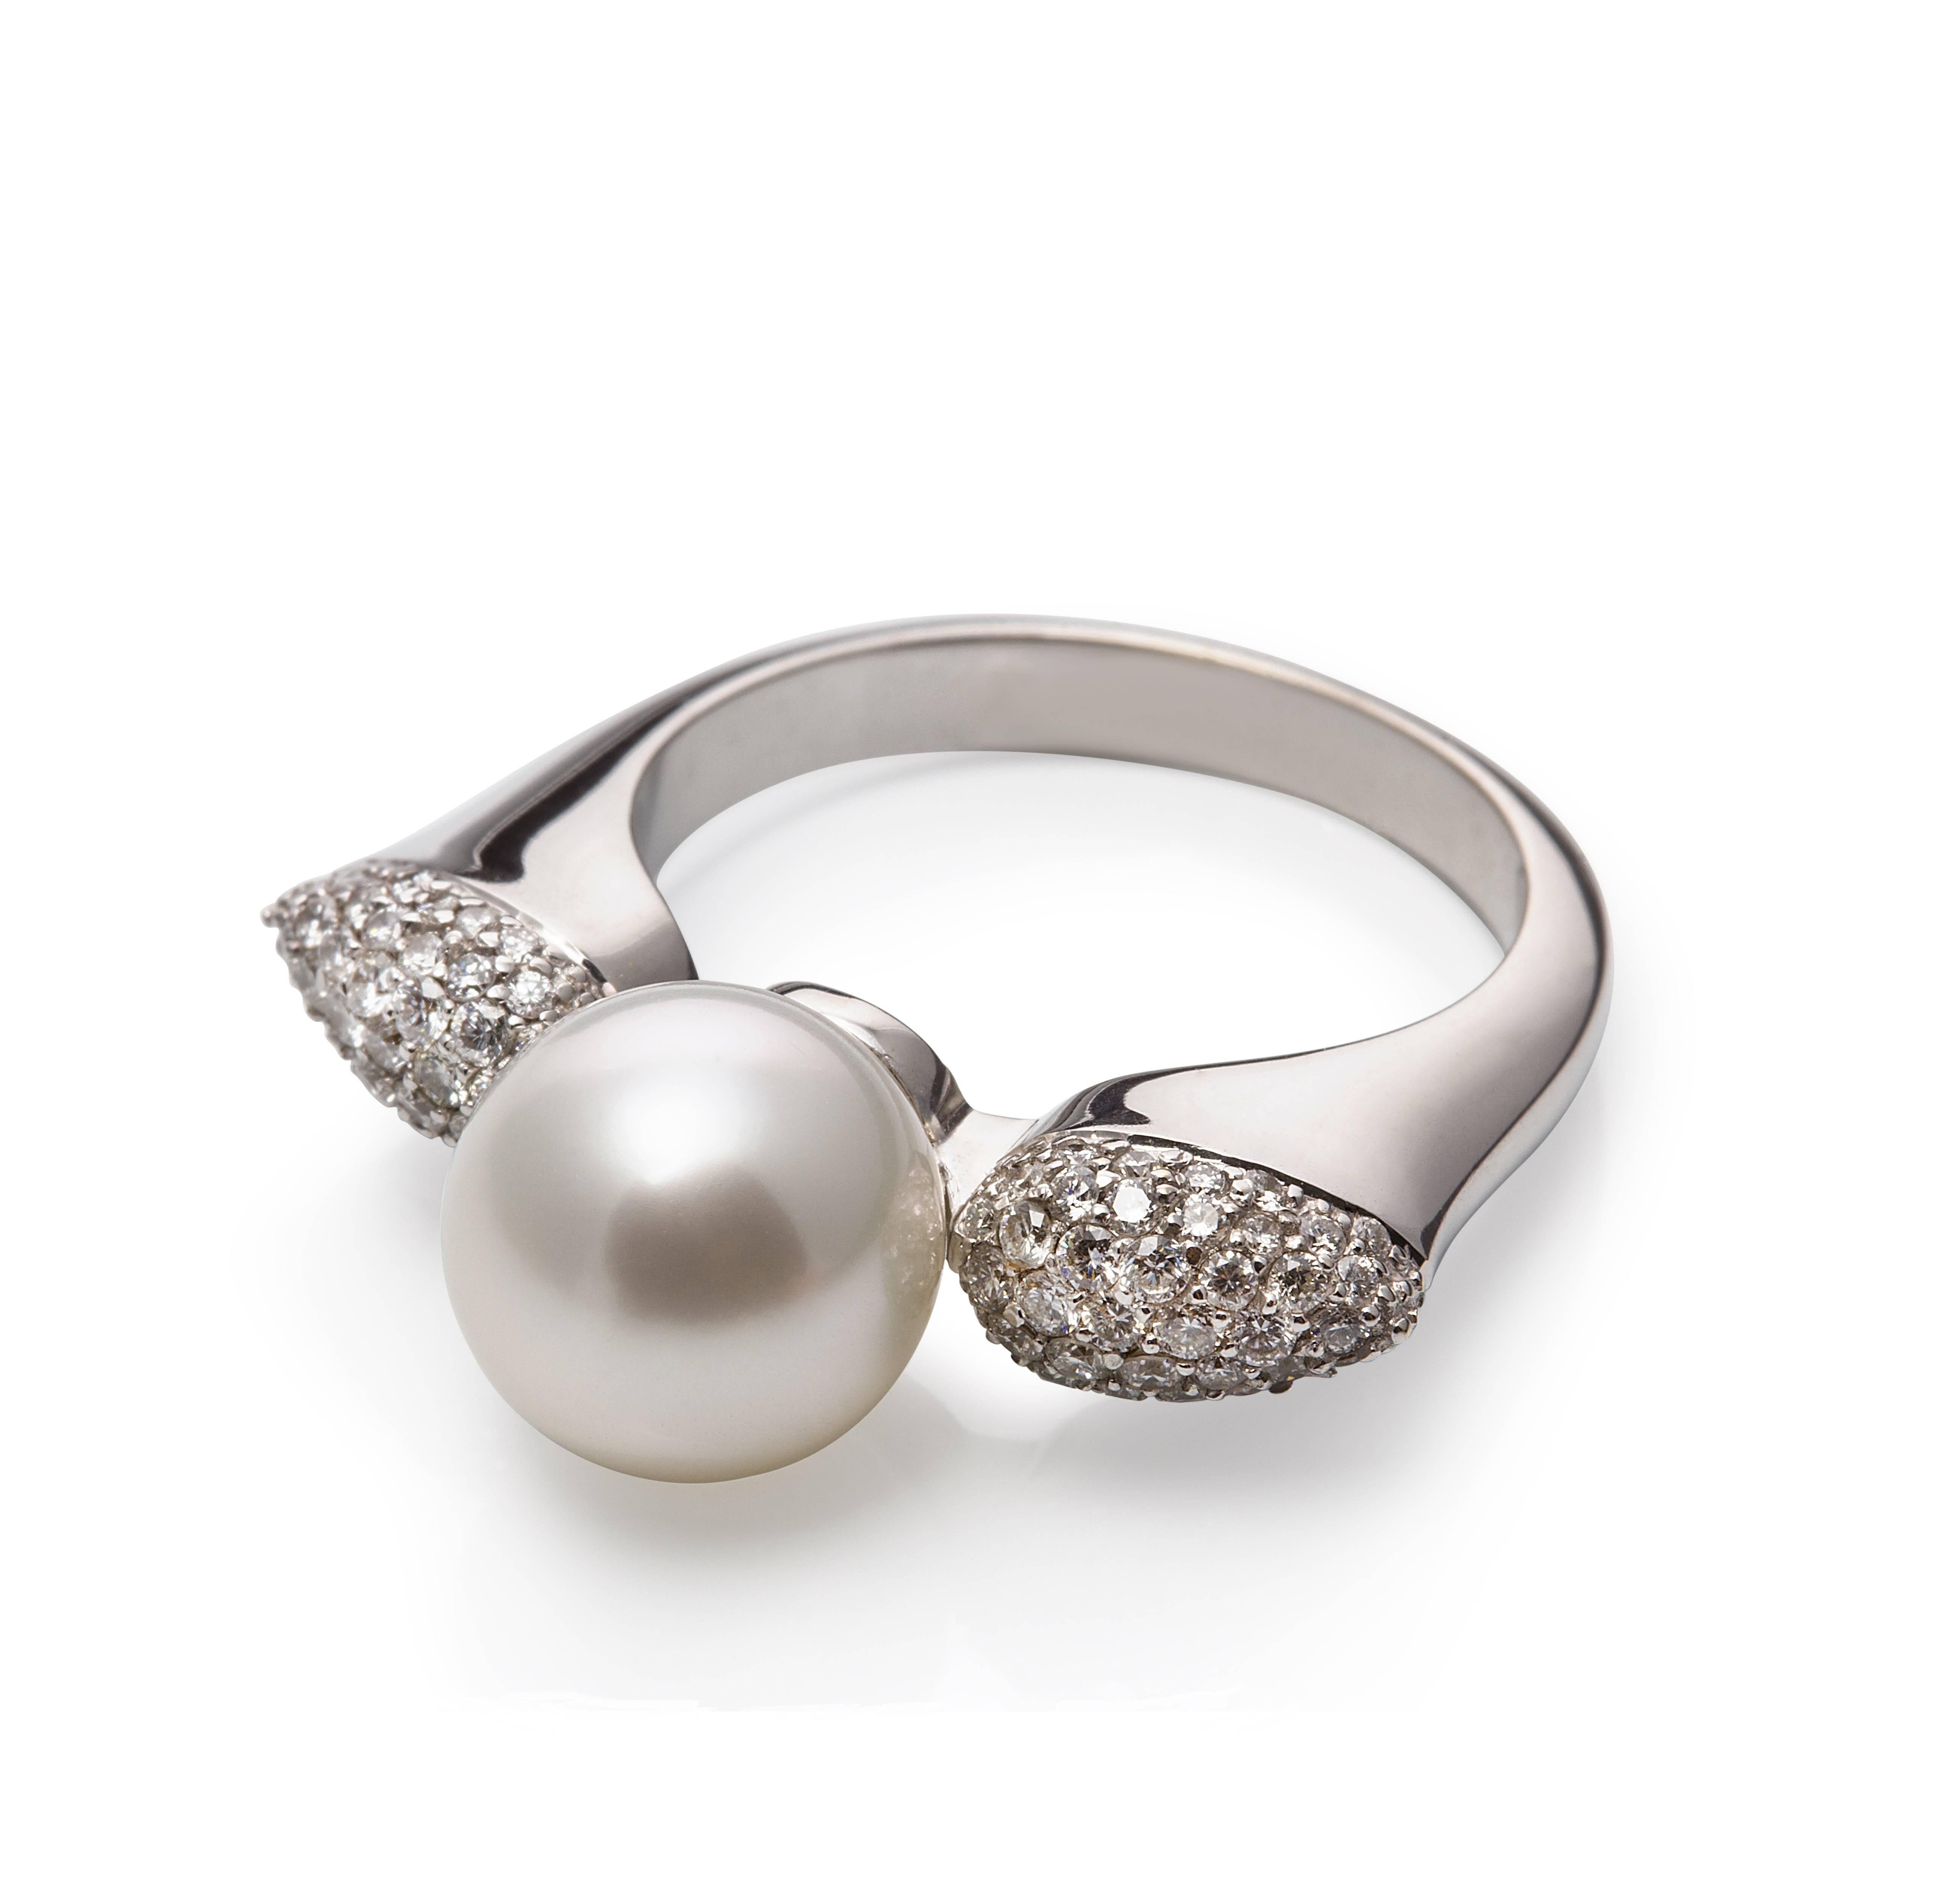 18ct white gold pave set side cushioned ring with 0.60ct diamonds with a centre 
0.37in/9-10mm white round high lustre exquisite South Sea pearl.

The curve of the shank gives comfort between the fingers and assists the shape to flare above the